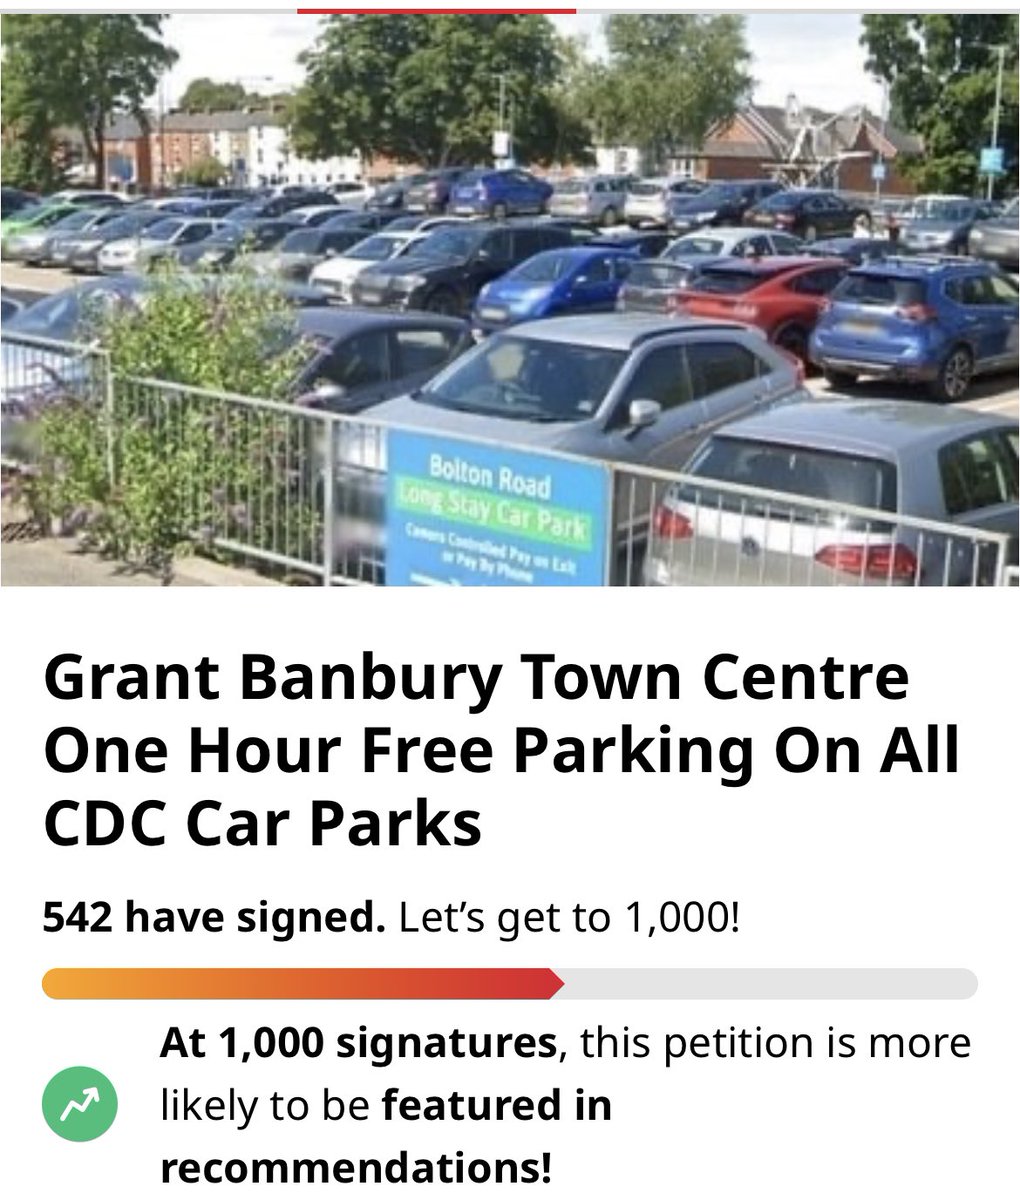 How does an hour’s free parking in Banbury sound? We’d love to find out if it would help readdress the balance to the out of town retail parks and encourage more visitors to the town. If you’d like to sign our petition, here’s the link: chng.it/HftDvVVC #banbury